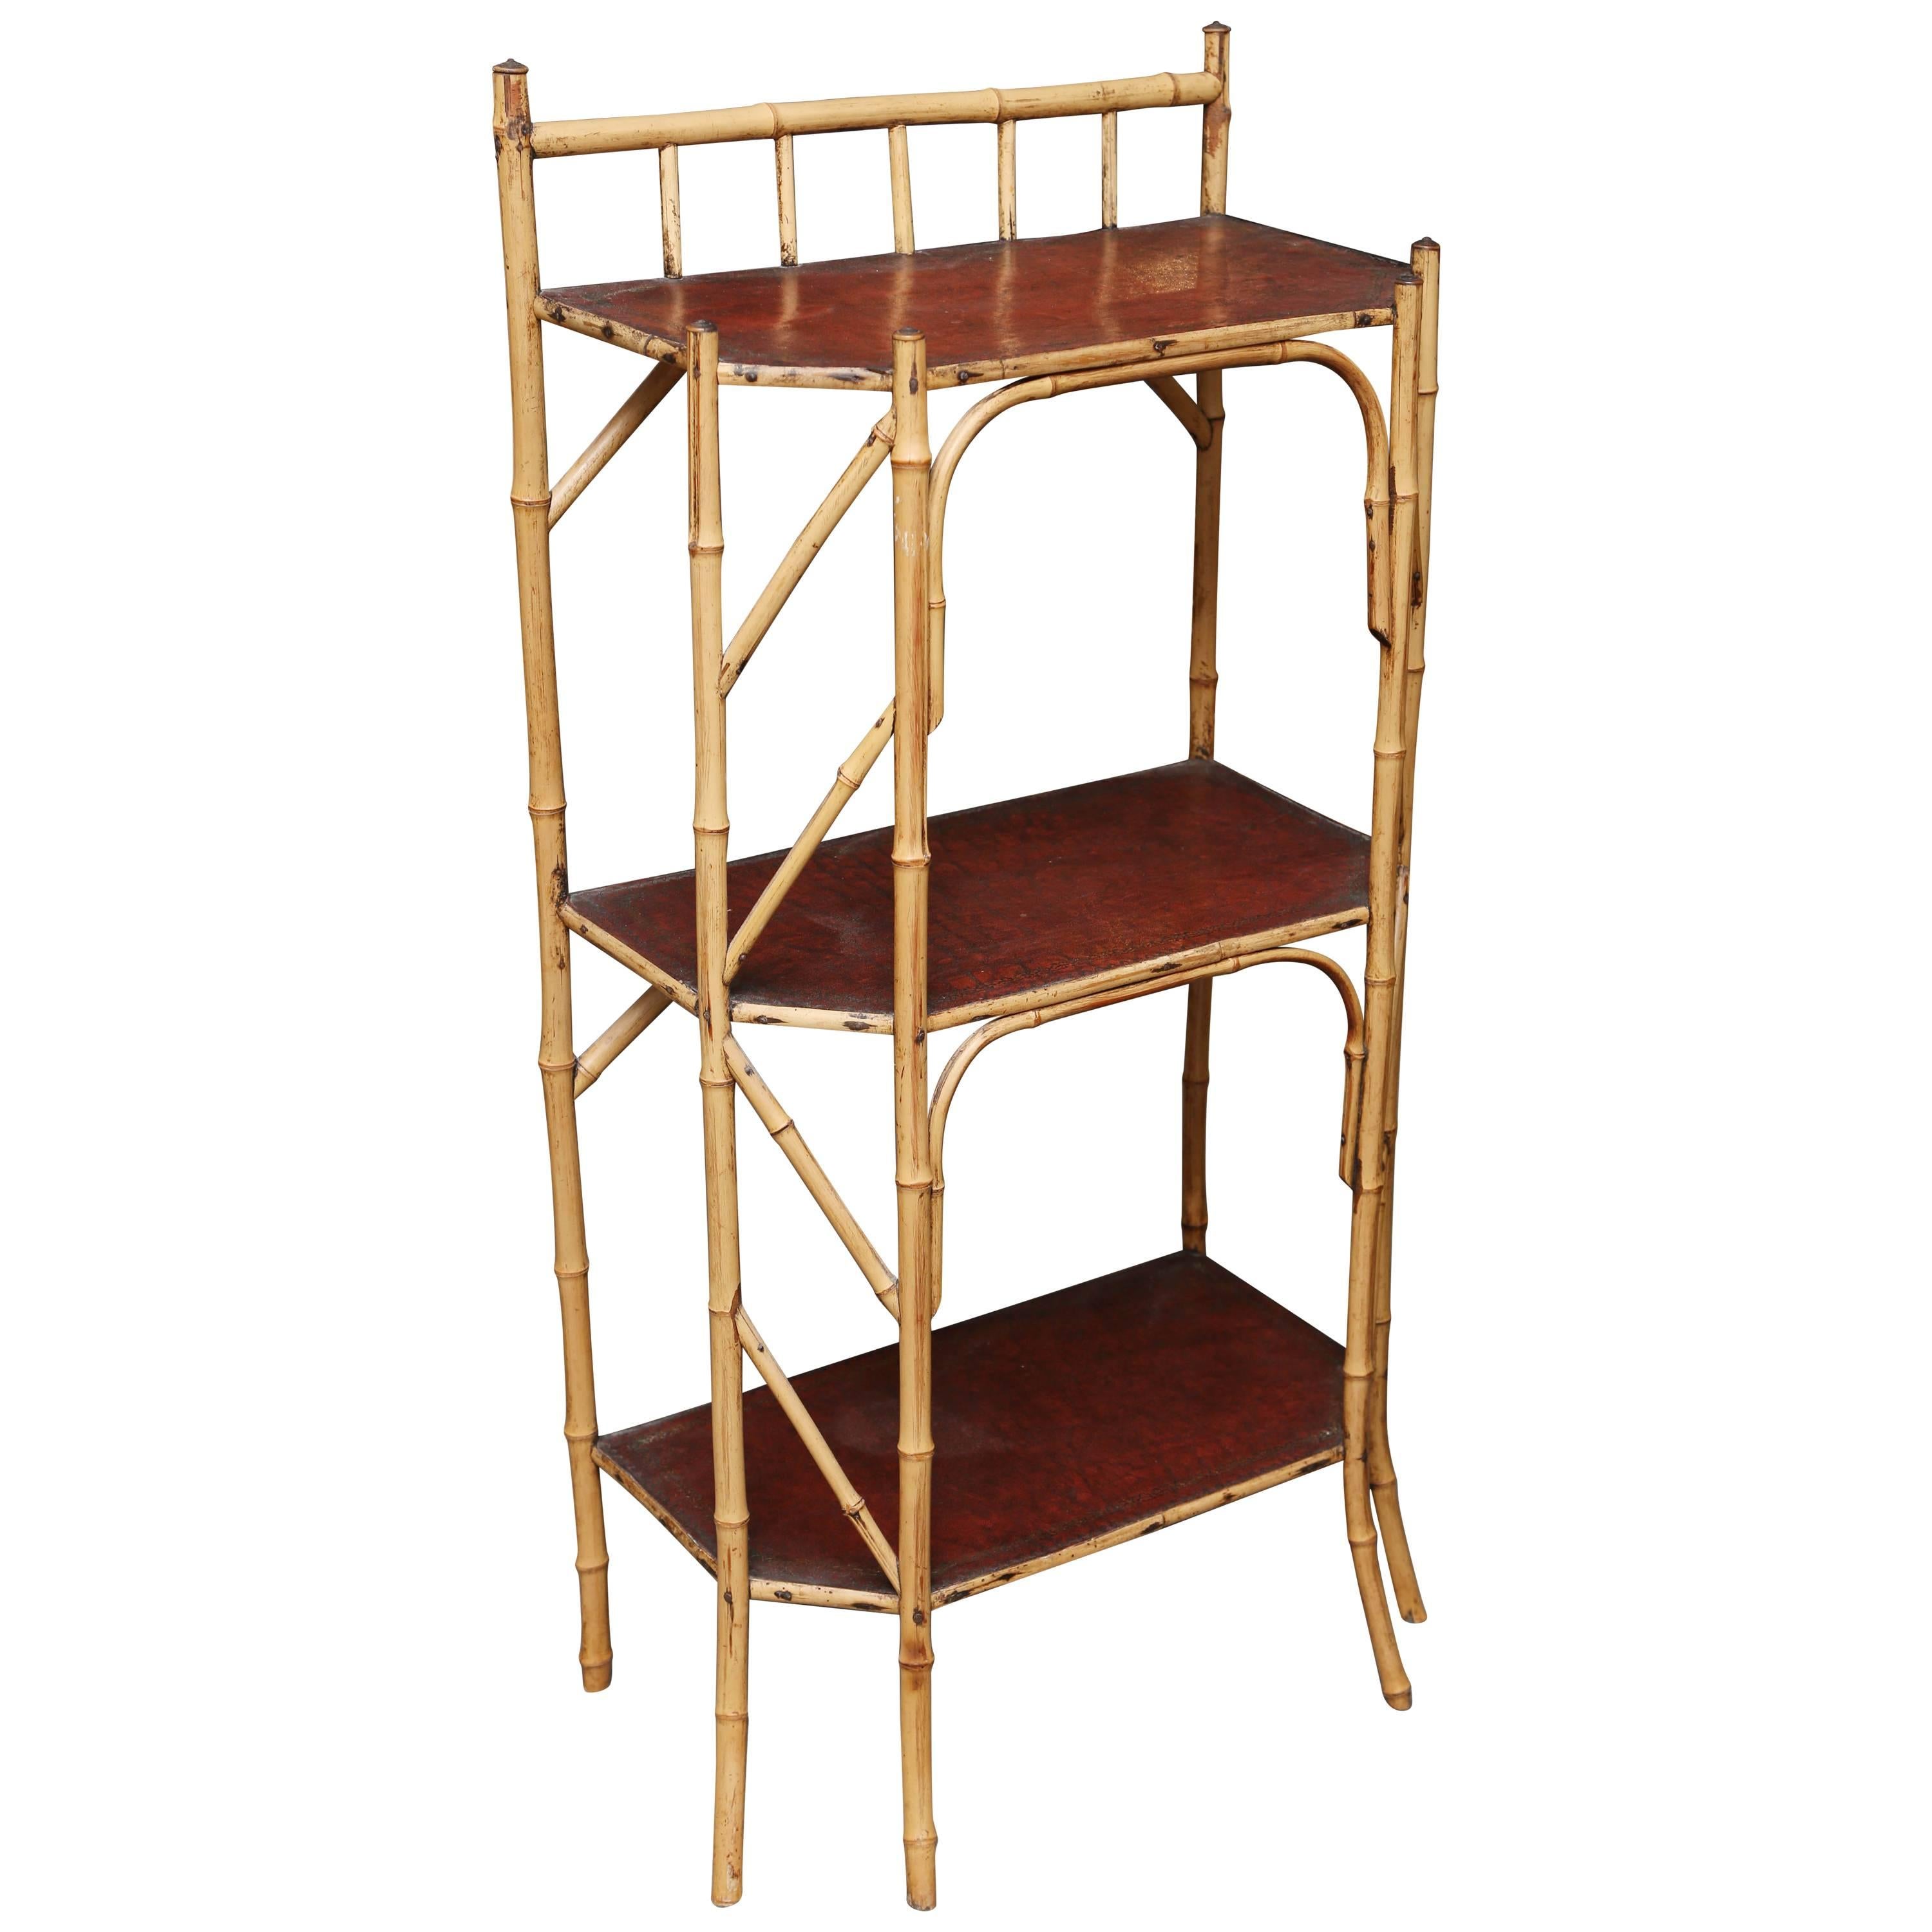 Superb 19th Century English Bamboo Book Stand